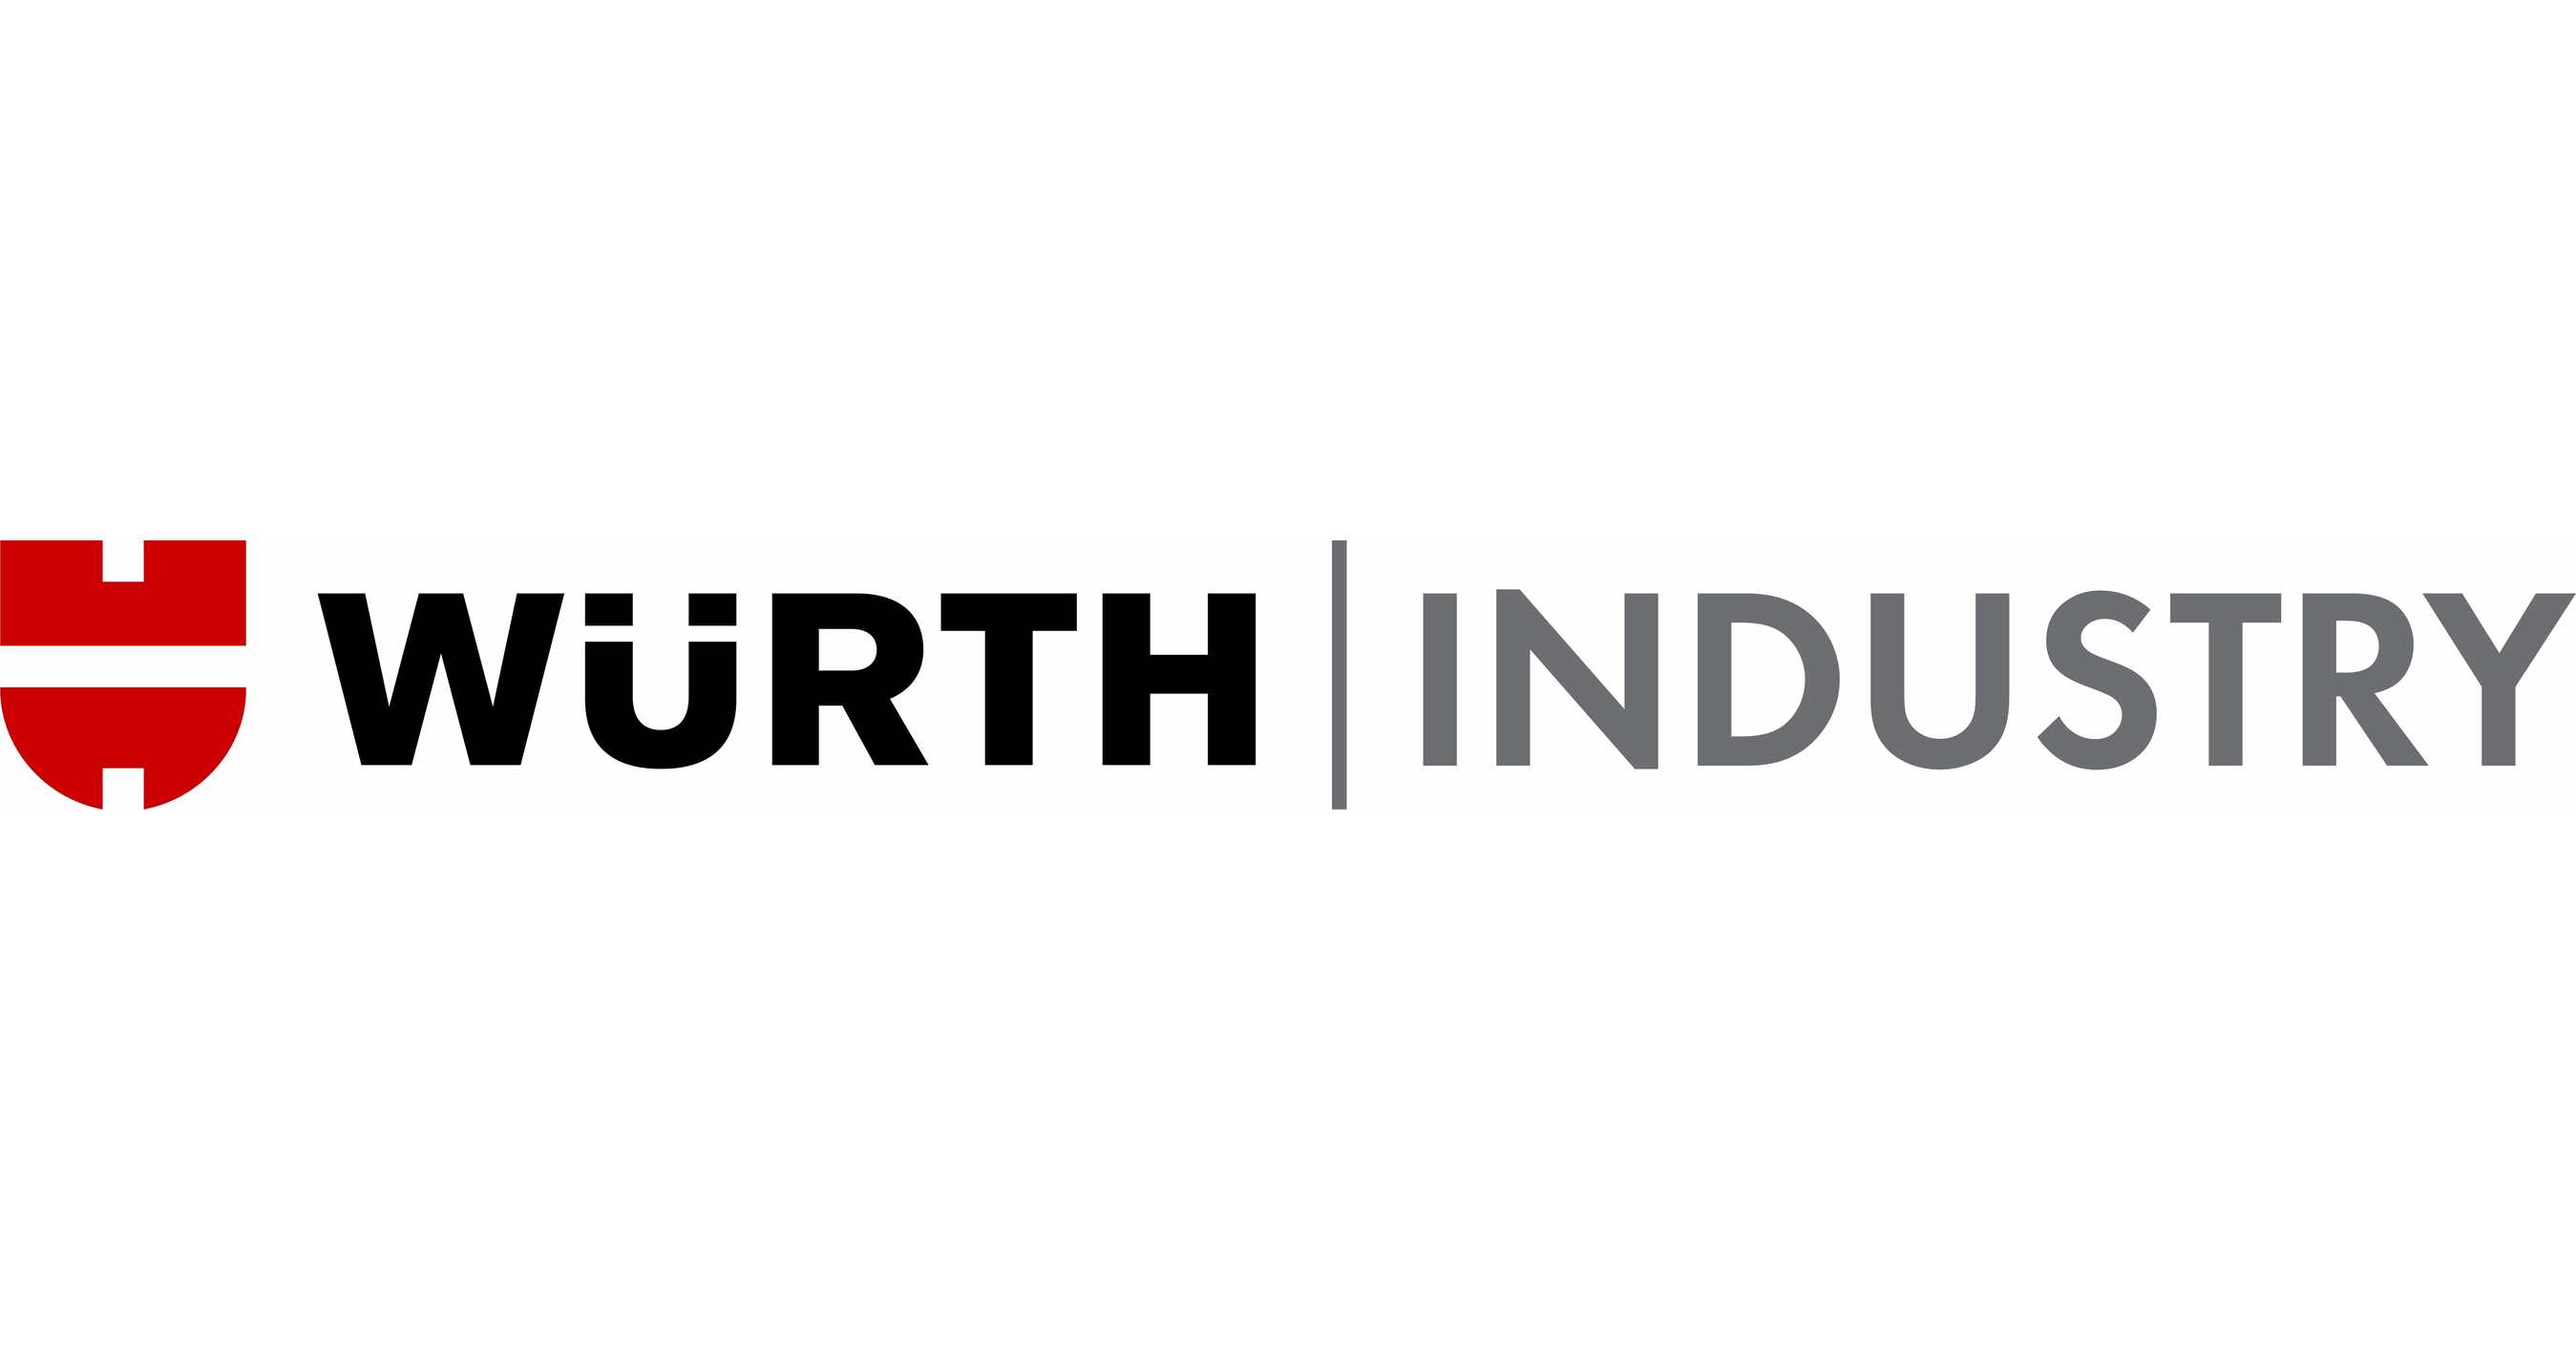 WÜRTH INDUSTRY NORTH AMERICA DELIVERS STRONG SALES RESULTS THROUGH